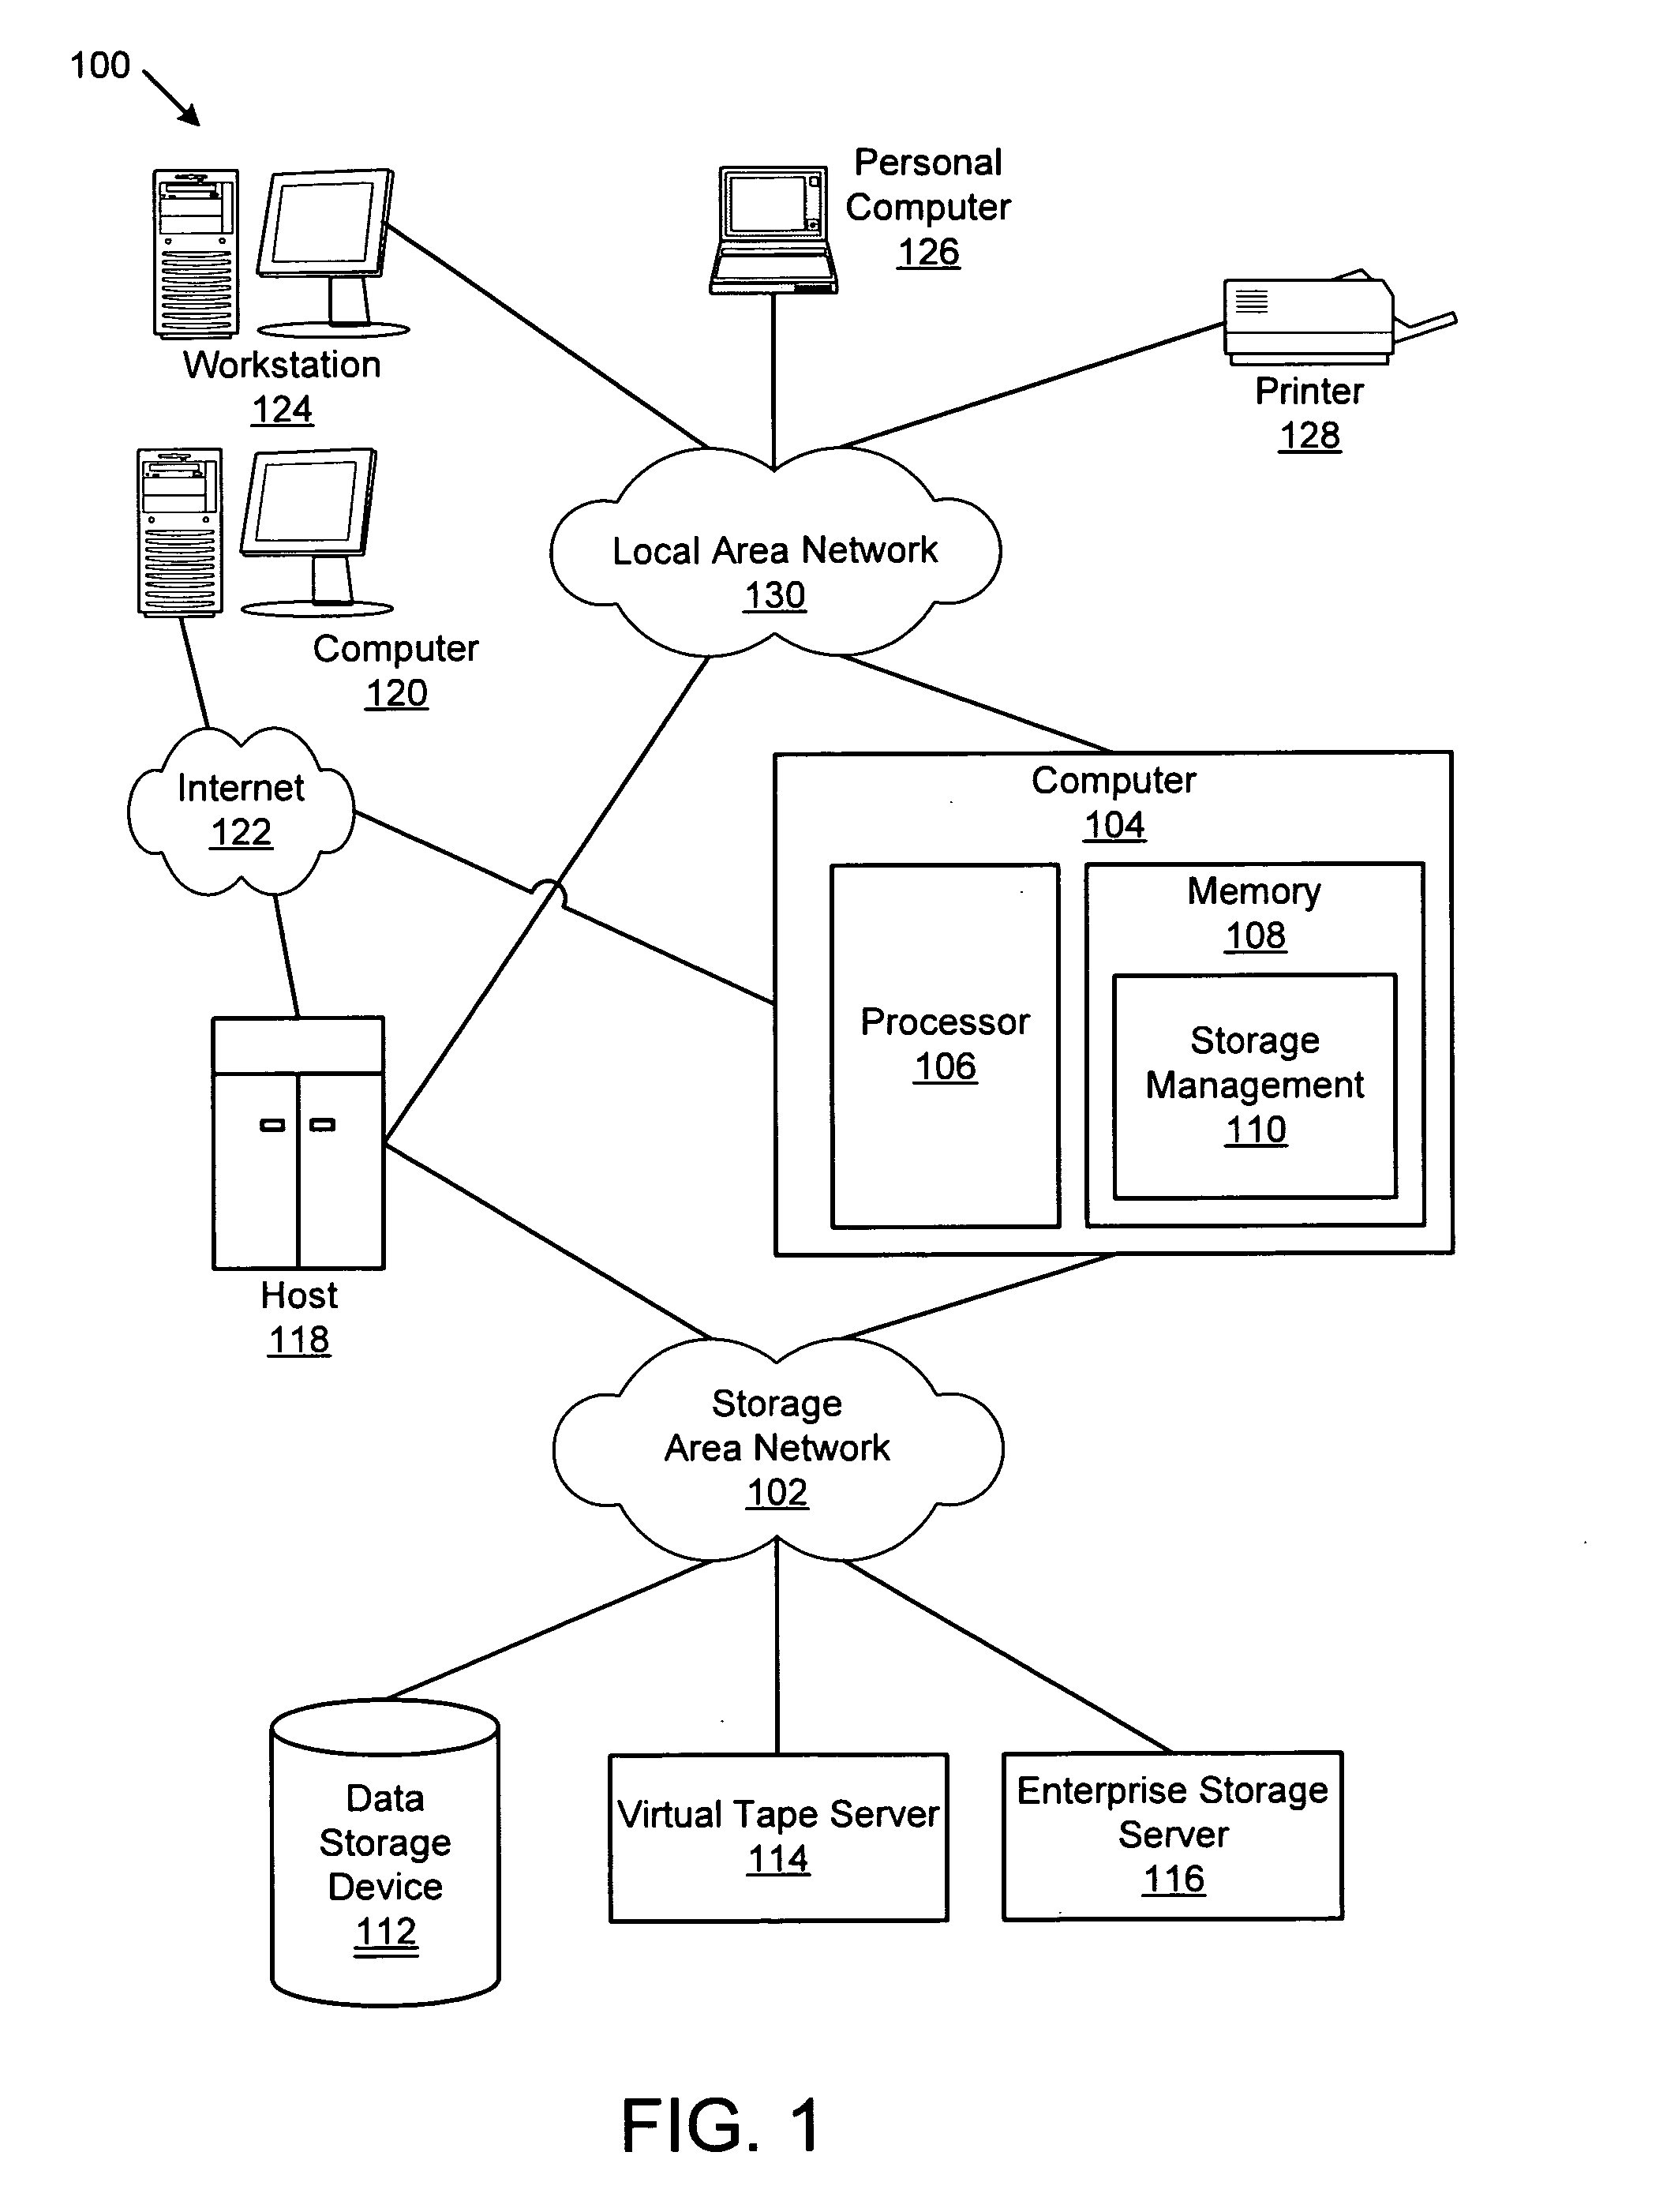 Apparatus, system, and method for dynamically determining a set of storage area network components for performance monitoring